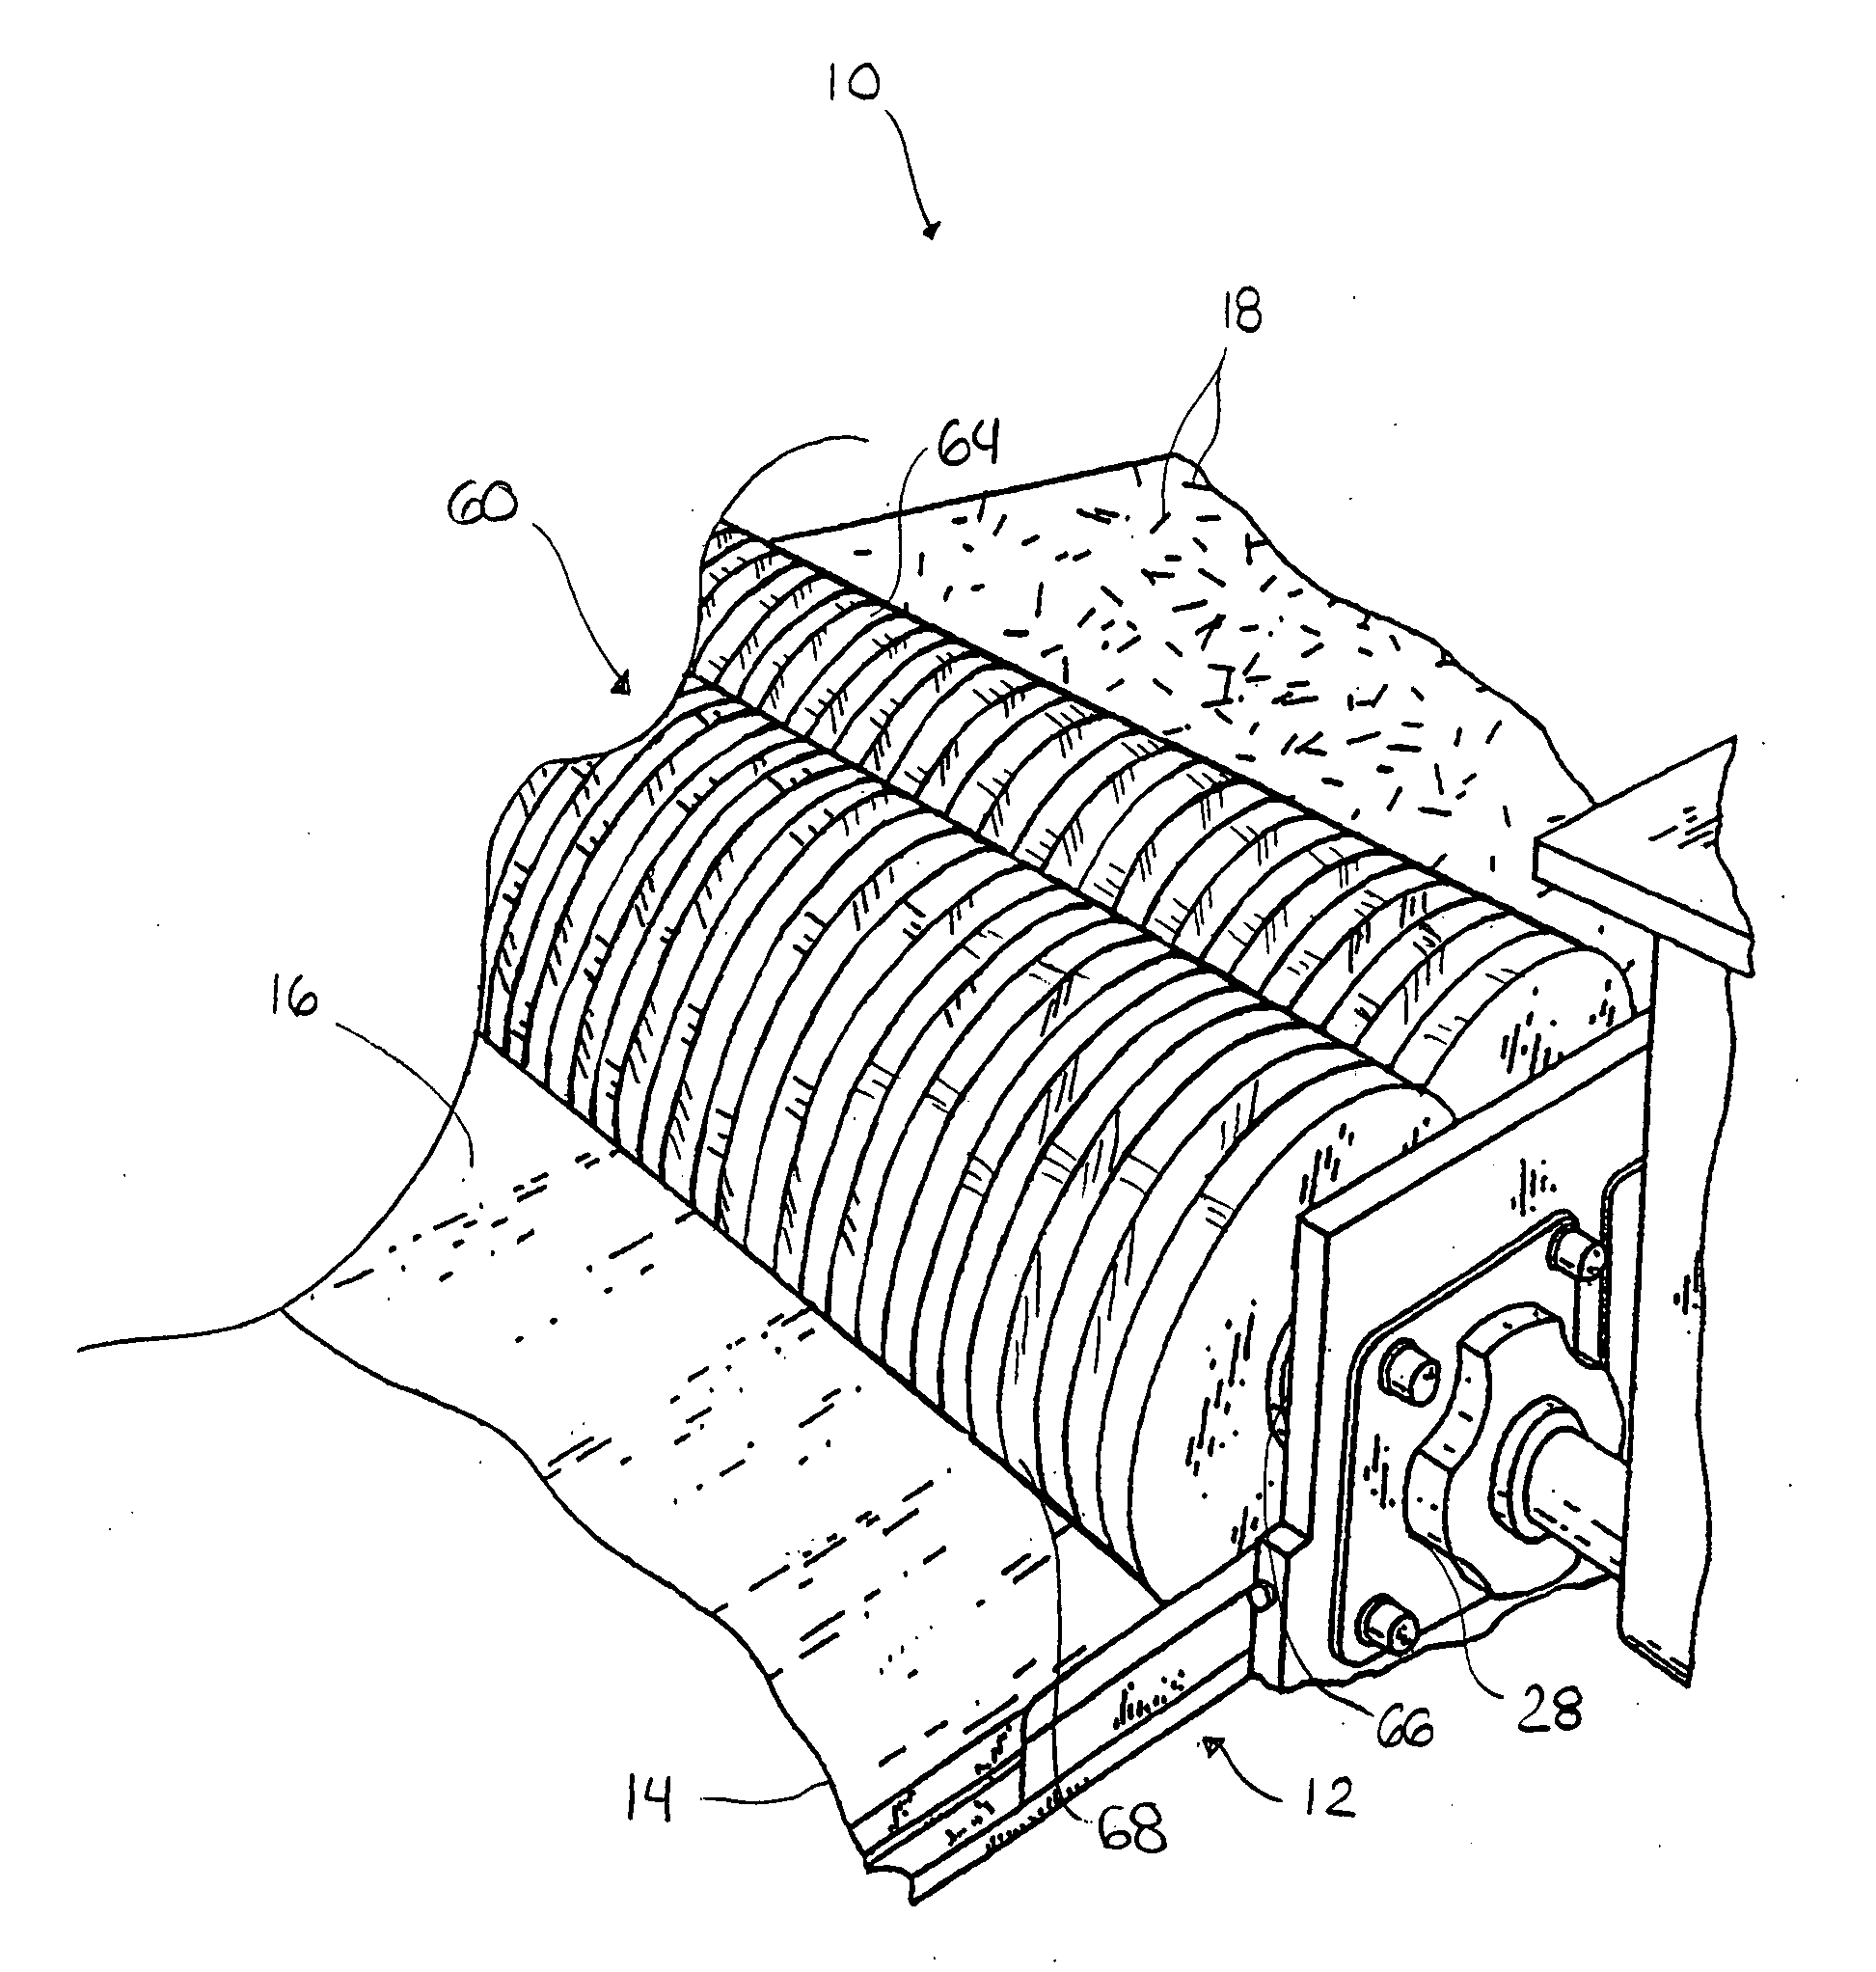 Embedment roll device